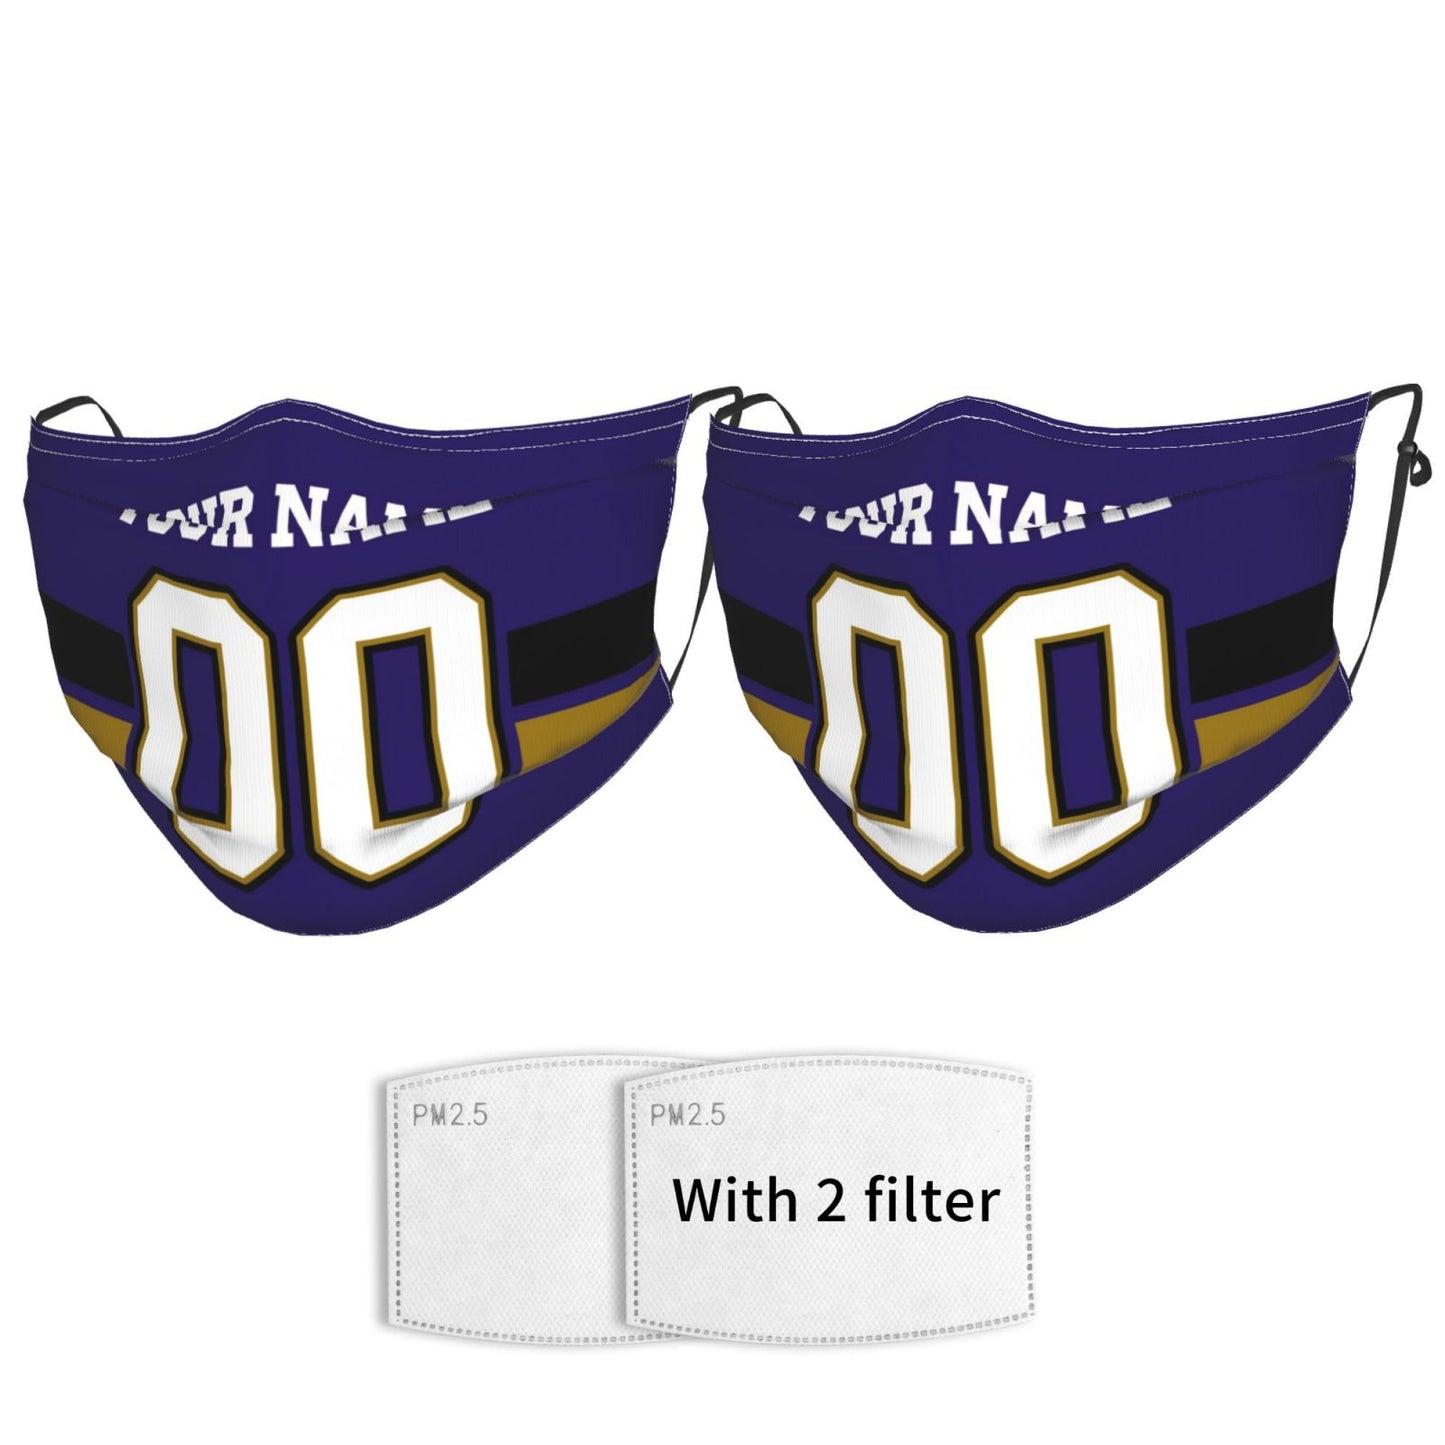 2-Pack Baltimore Ravens Face Covering Football Team Decorative Adult Face Mask With Filters PM 2.5 Purple